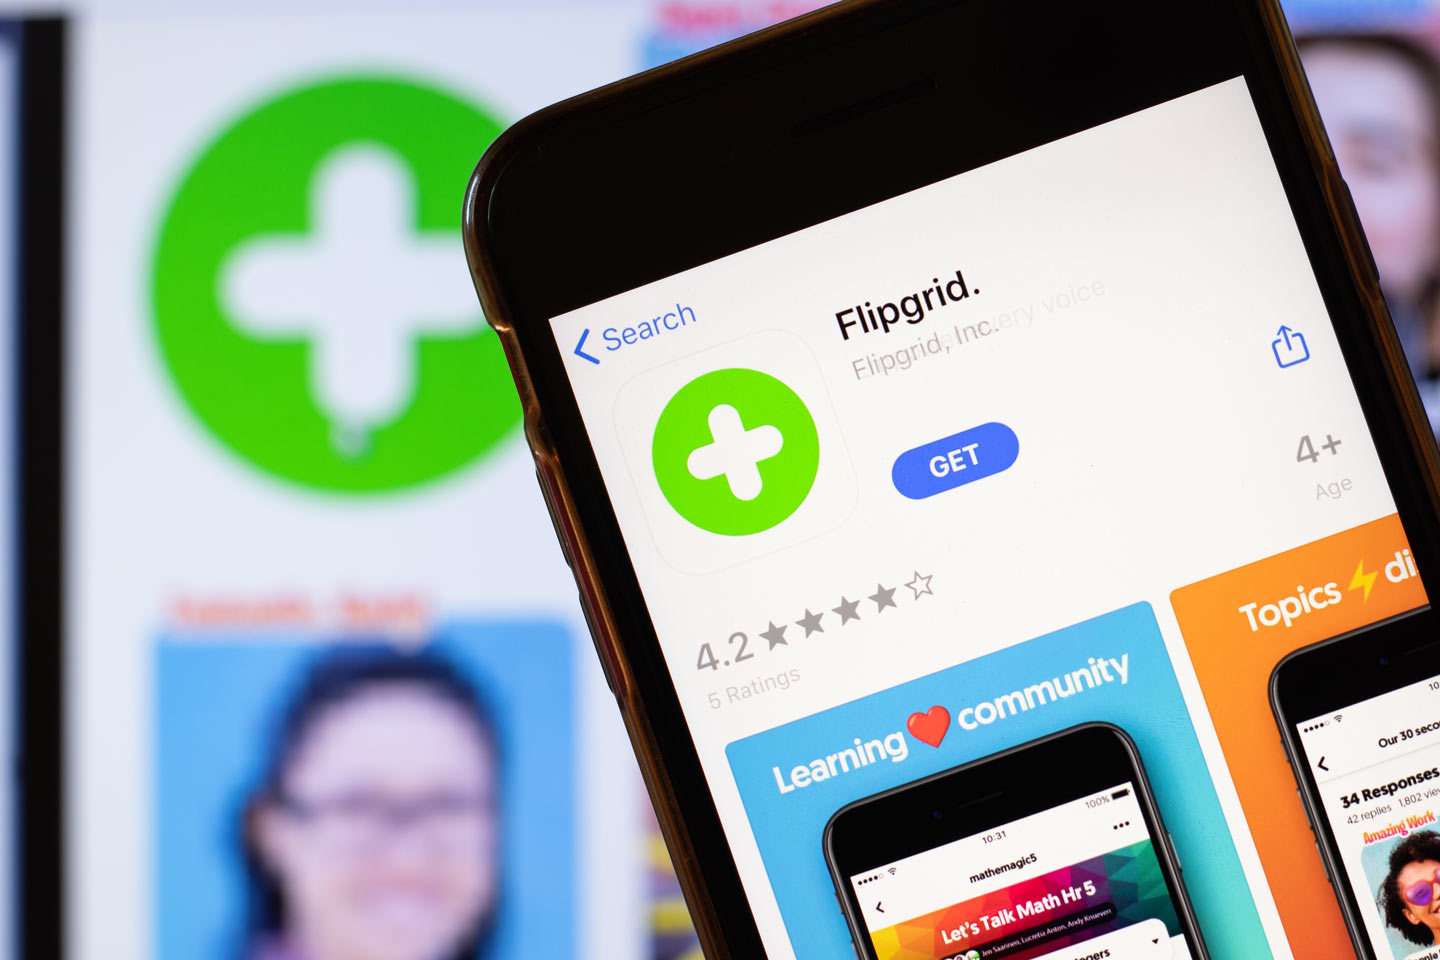 Flipgrid in the App Store